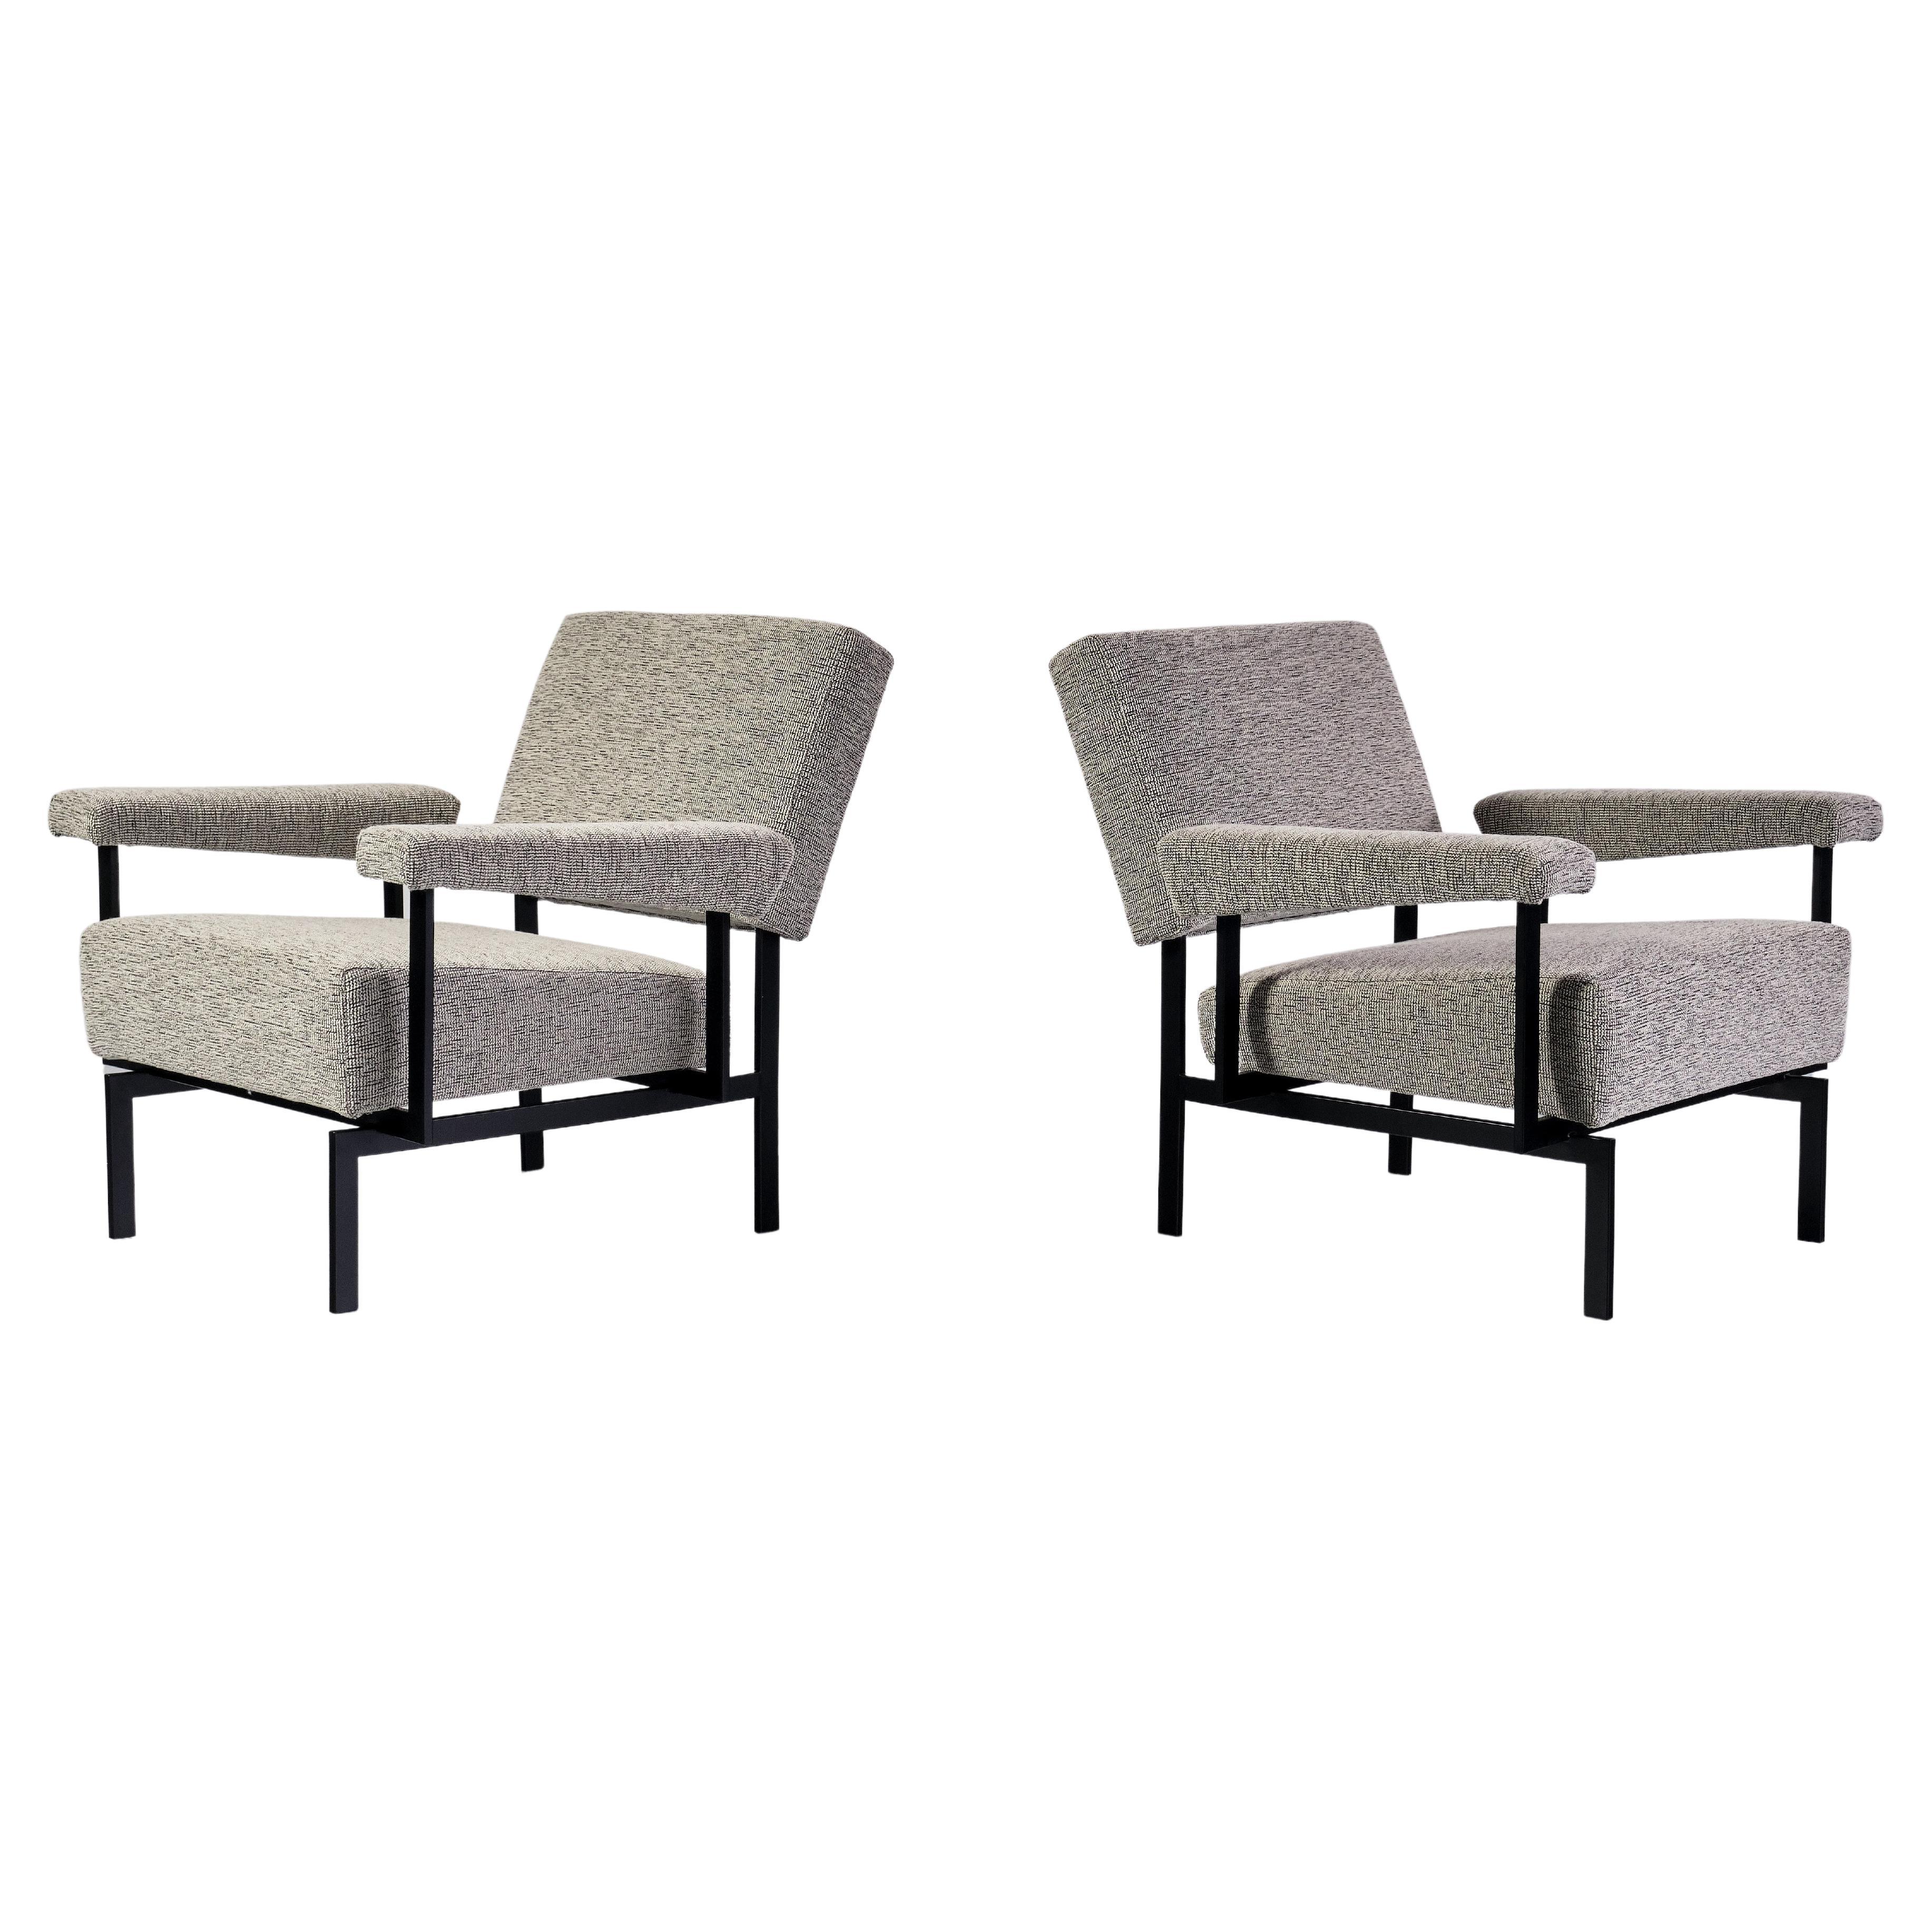 Cees Braakman FM07 Armchairs, Japan Series for Pastoe, Netherlands, 1958 For Sale